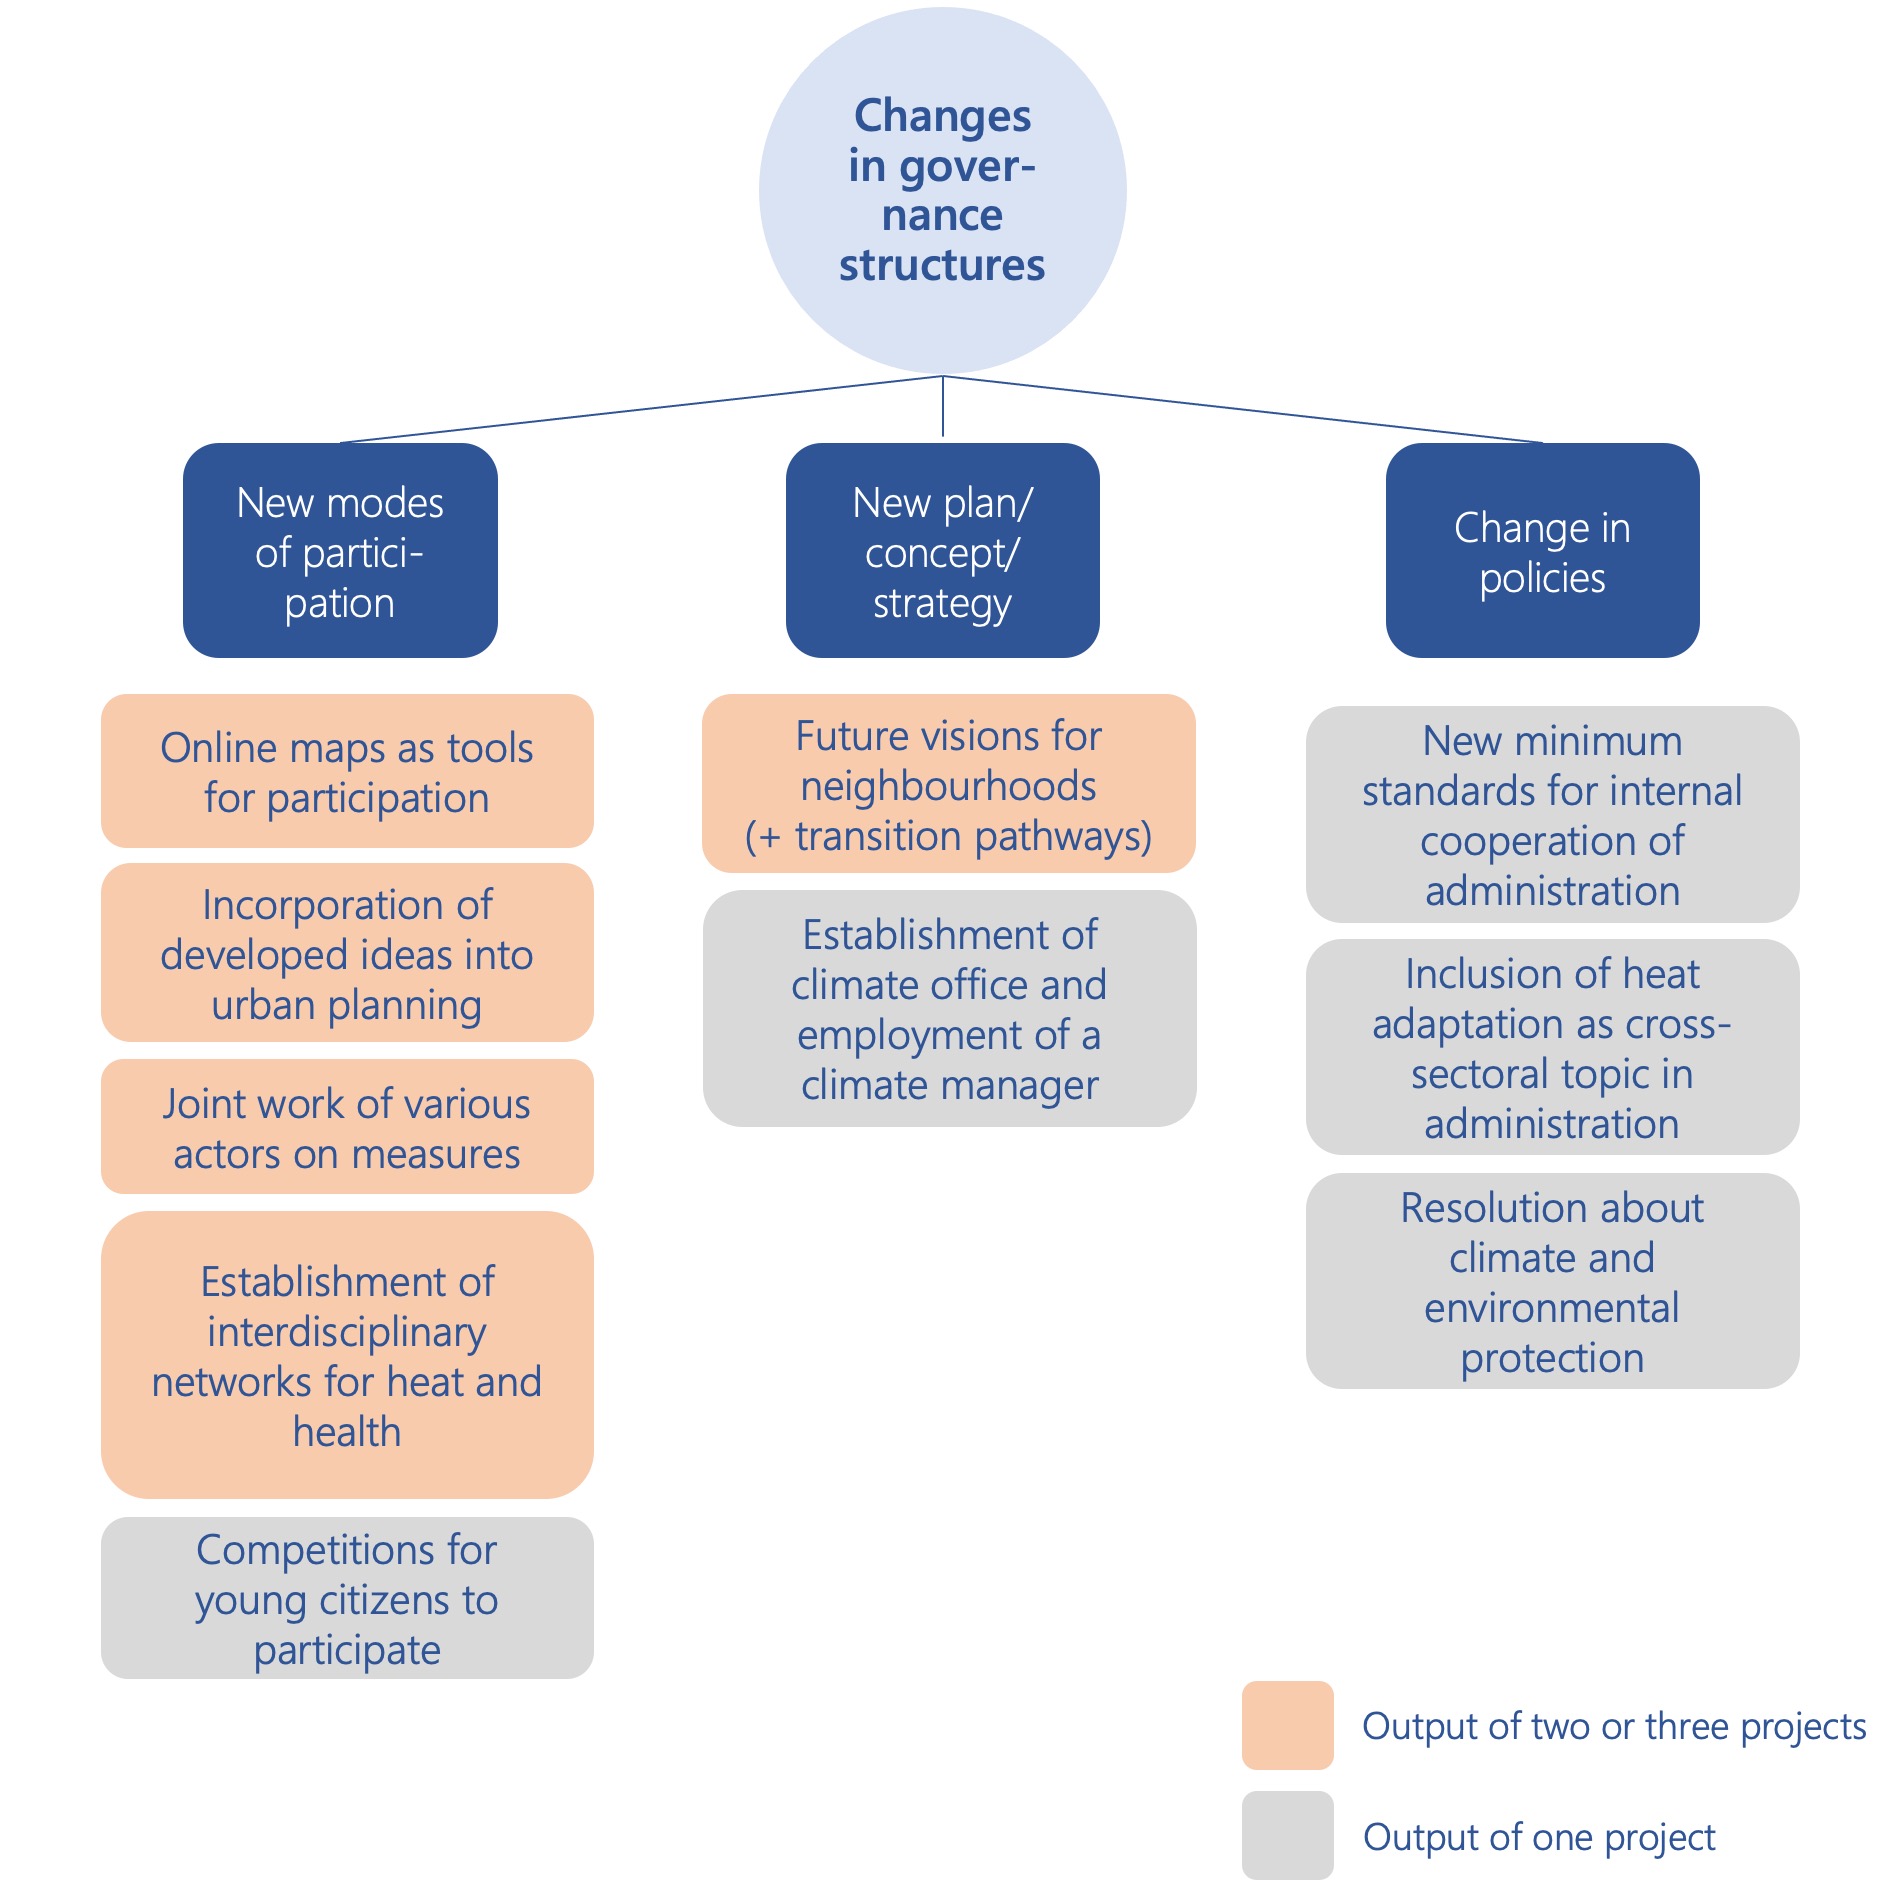 Figure 3 shows the changes in governance structures, which were achieved within the projects. These are divided into new modes of participation, changes in policies and new plans, concepts and strategies.